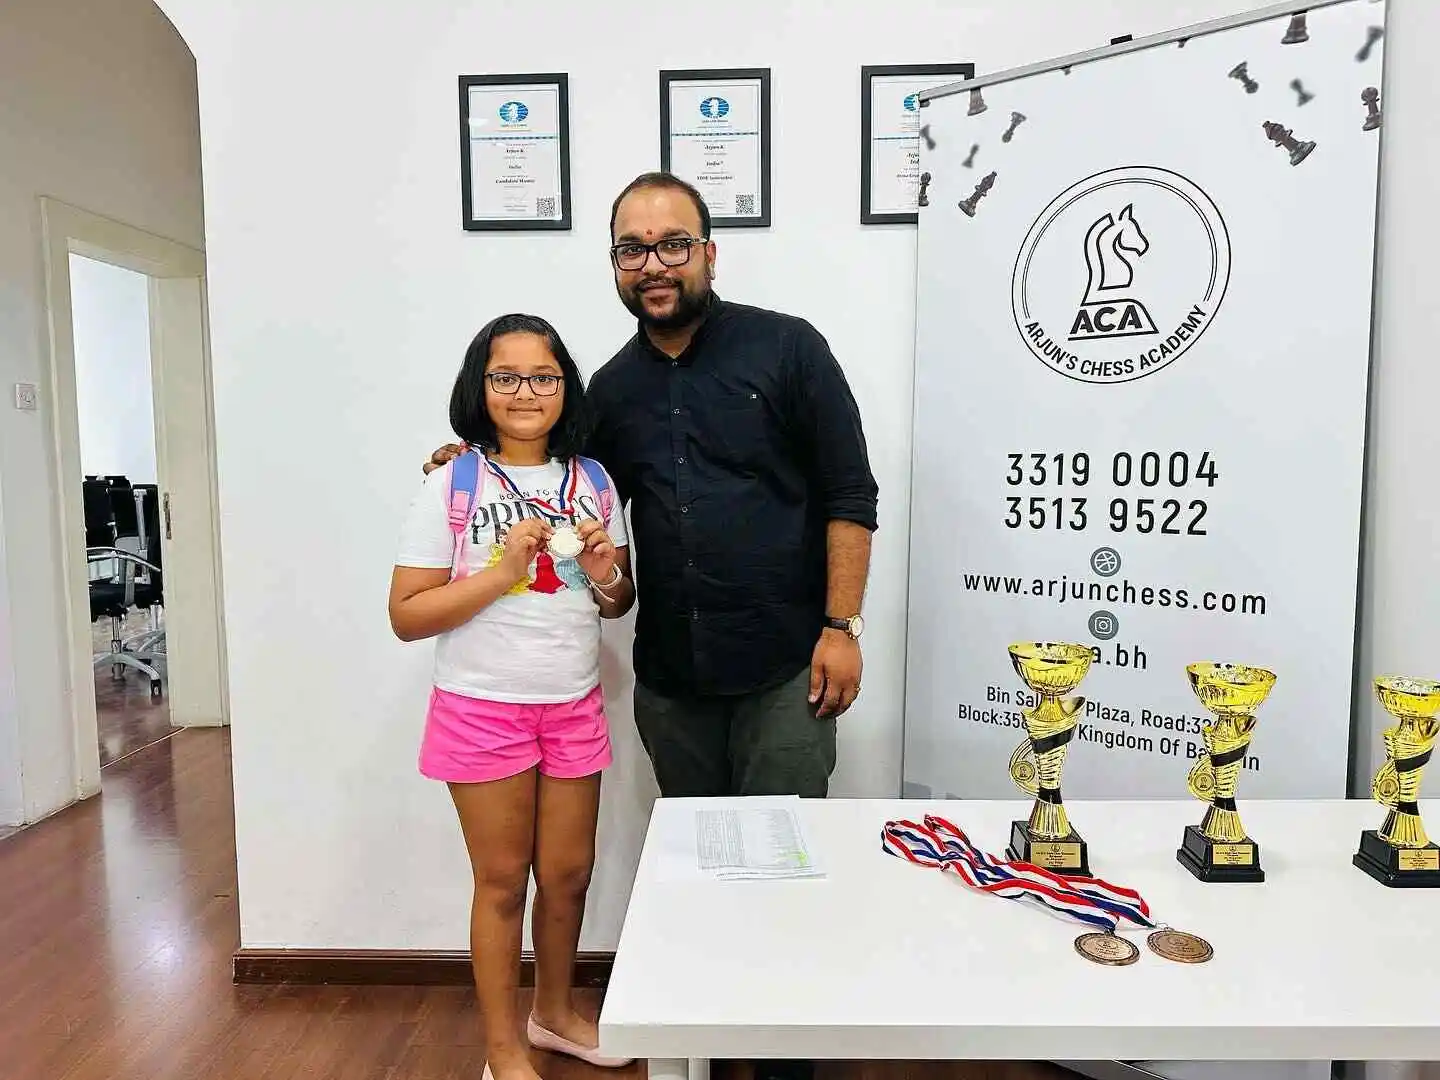 Students Achievements (May) - 5th ACA Rapid Chess Tournament - Eid Special Category B winner 7.1